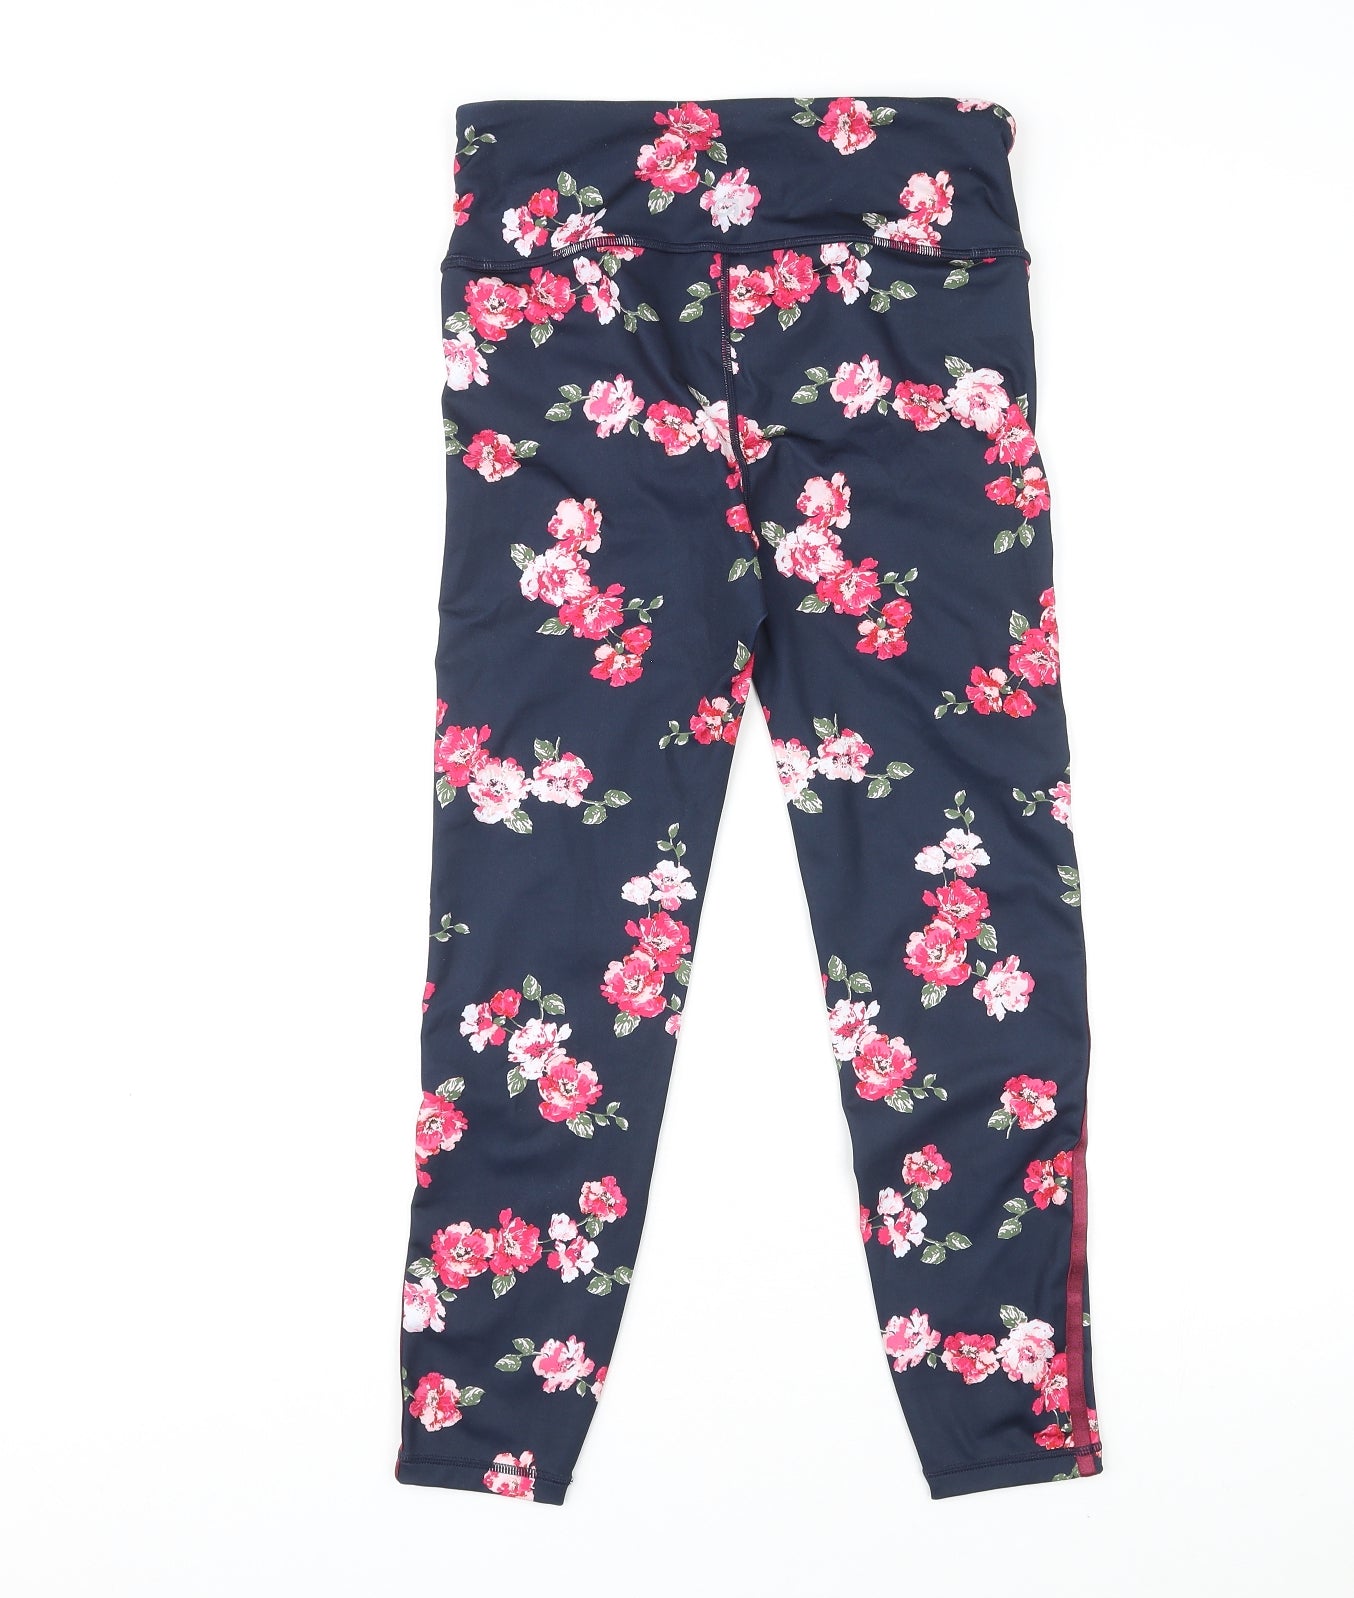 Gapfit Womens Multicoloured Floral Polyester Compression Leggings Size S L24 in Regular